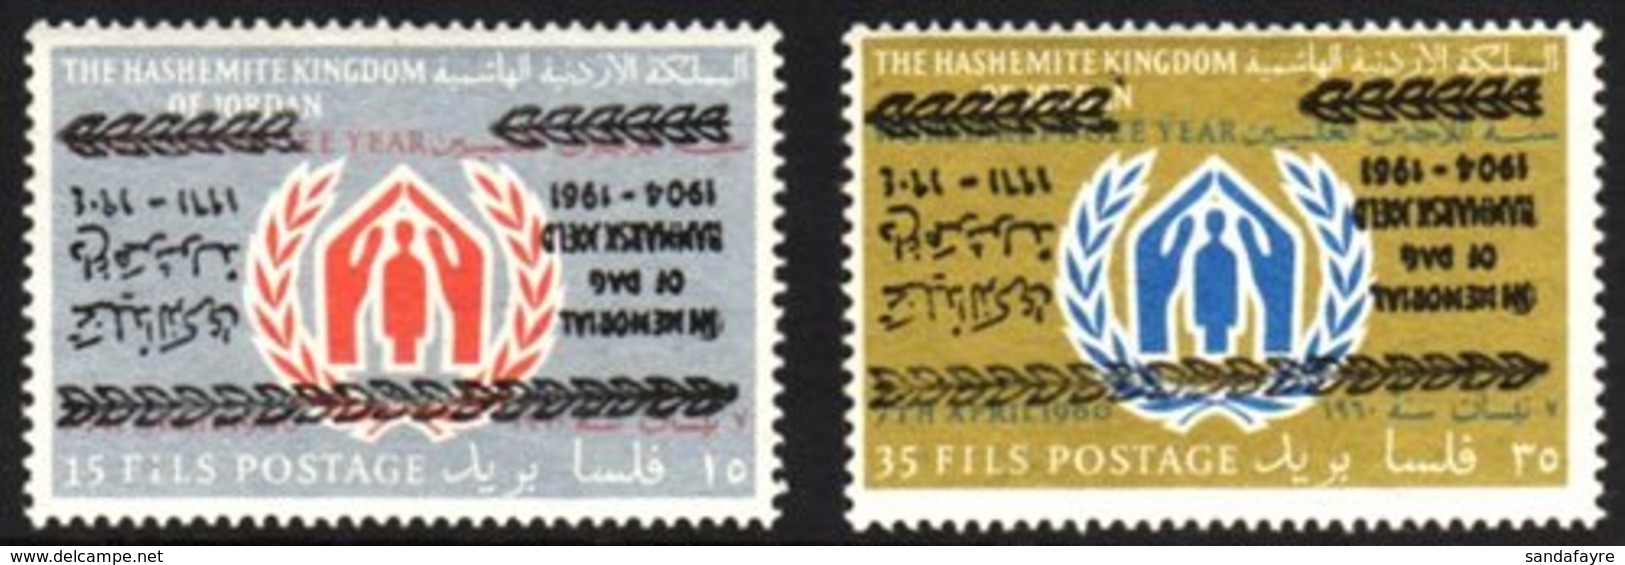 1961 Dag Hammarskjold 15f And 35f, Each With Inverted Overprints SG 505a And 506a, Fine Never Hinged Mint. (2) For More  - Jordanien